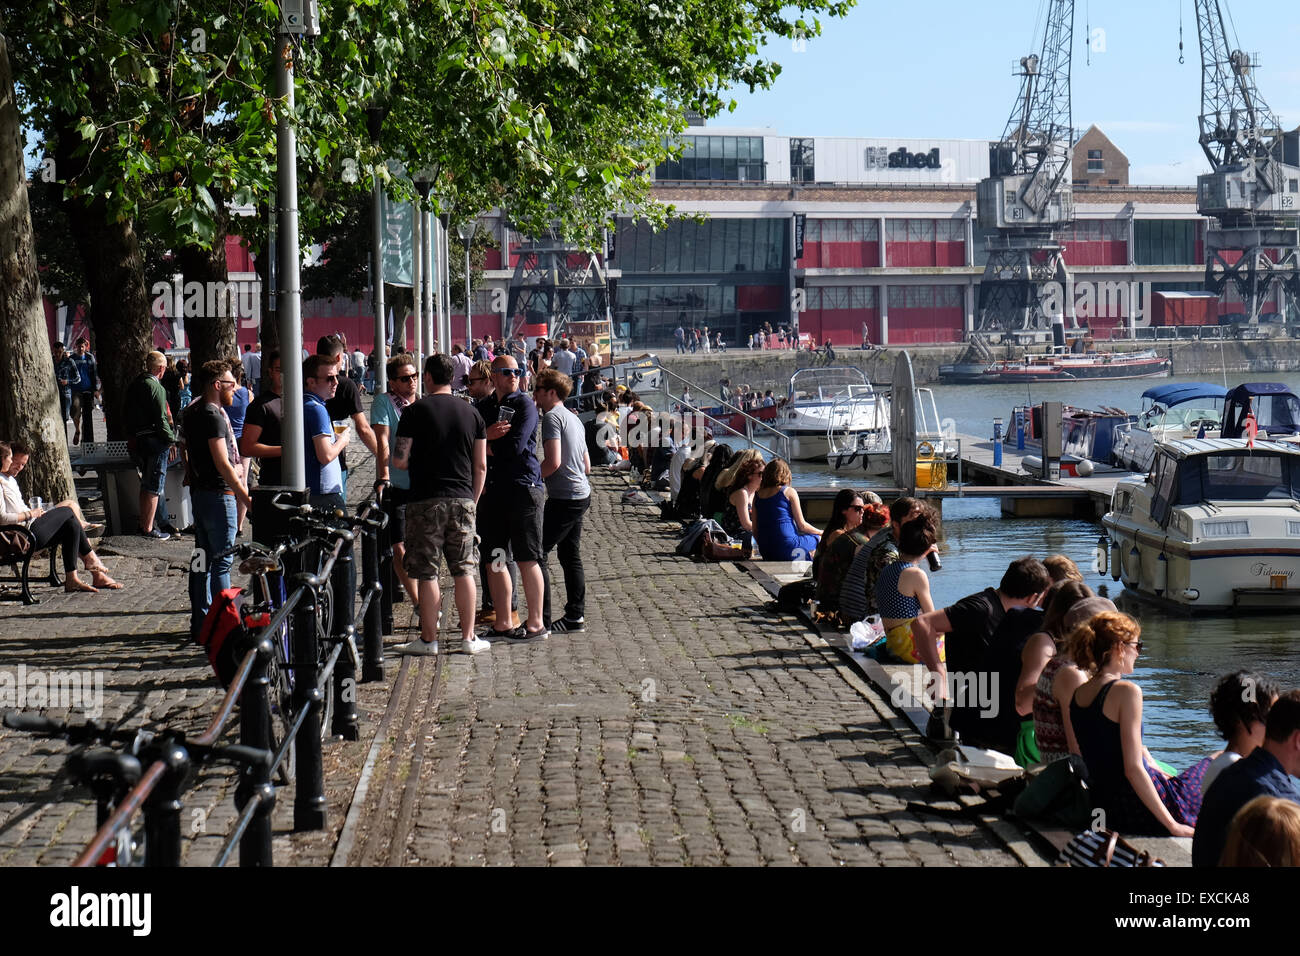 People relaxing and enjoying the sunshine at the Harbourside in Bristol, UK Stock Photo